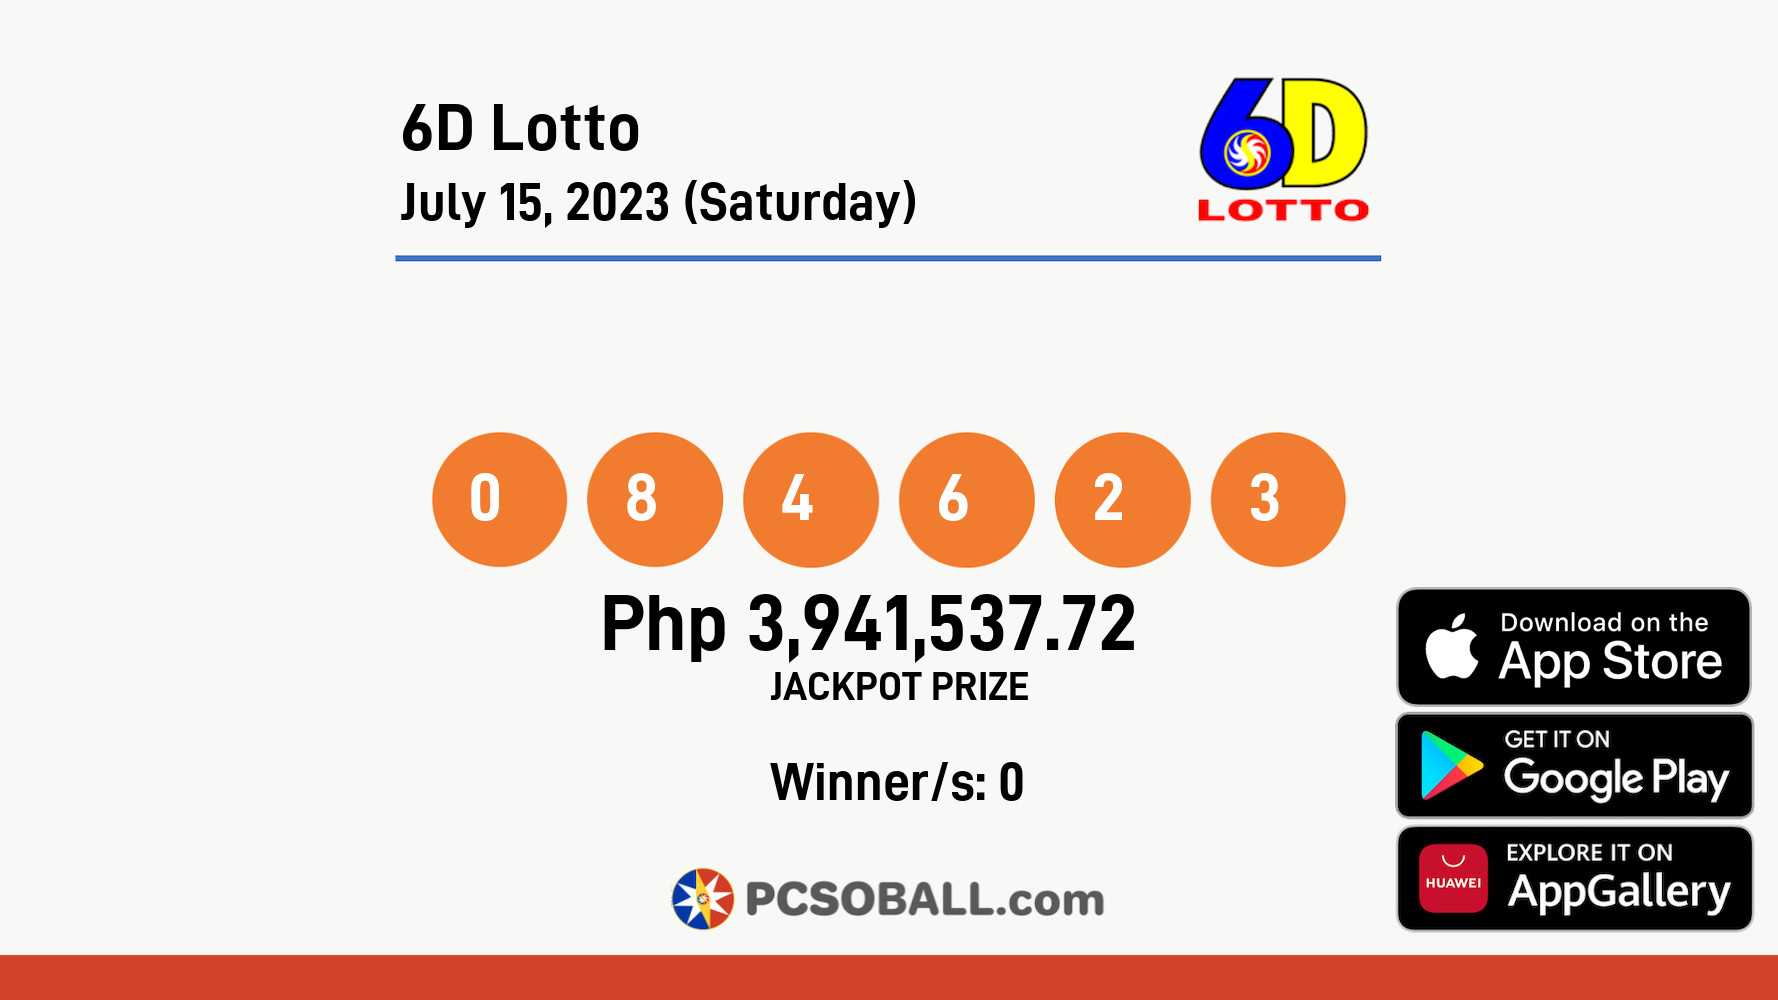 6D Lotto July 15, 2023 (Saturday) Result